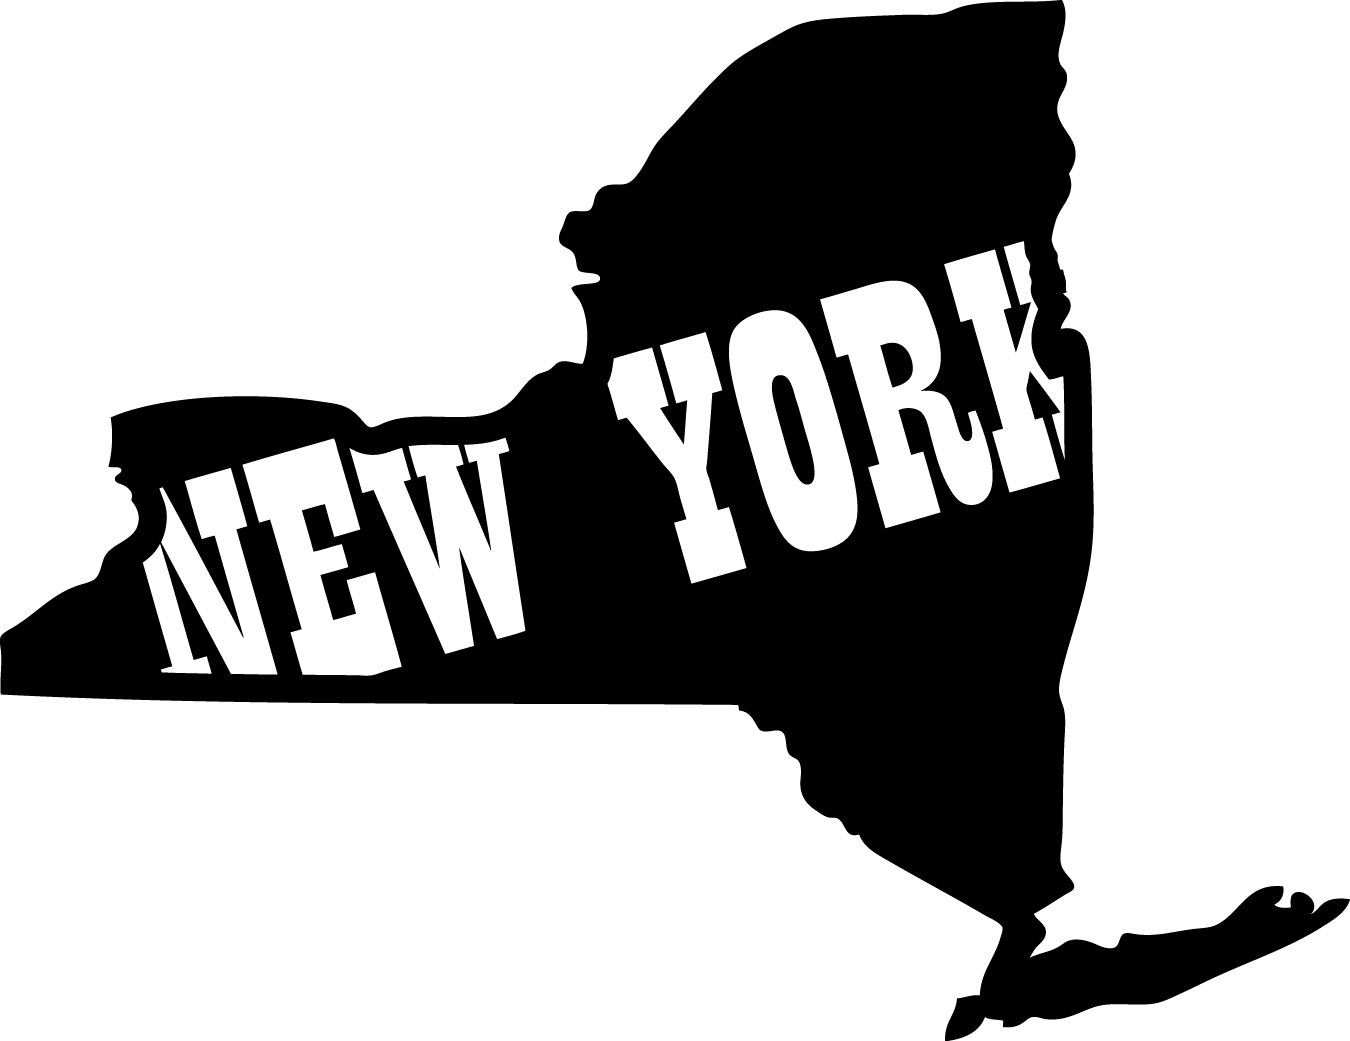 New York State Outline 3 (NY27) [NY27] - $4.99 : Eyecandy Decals ...